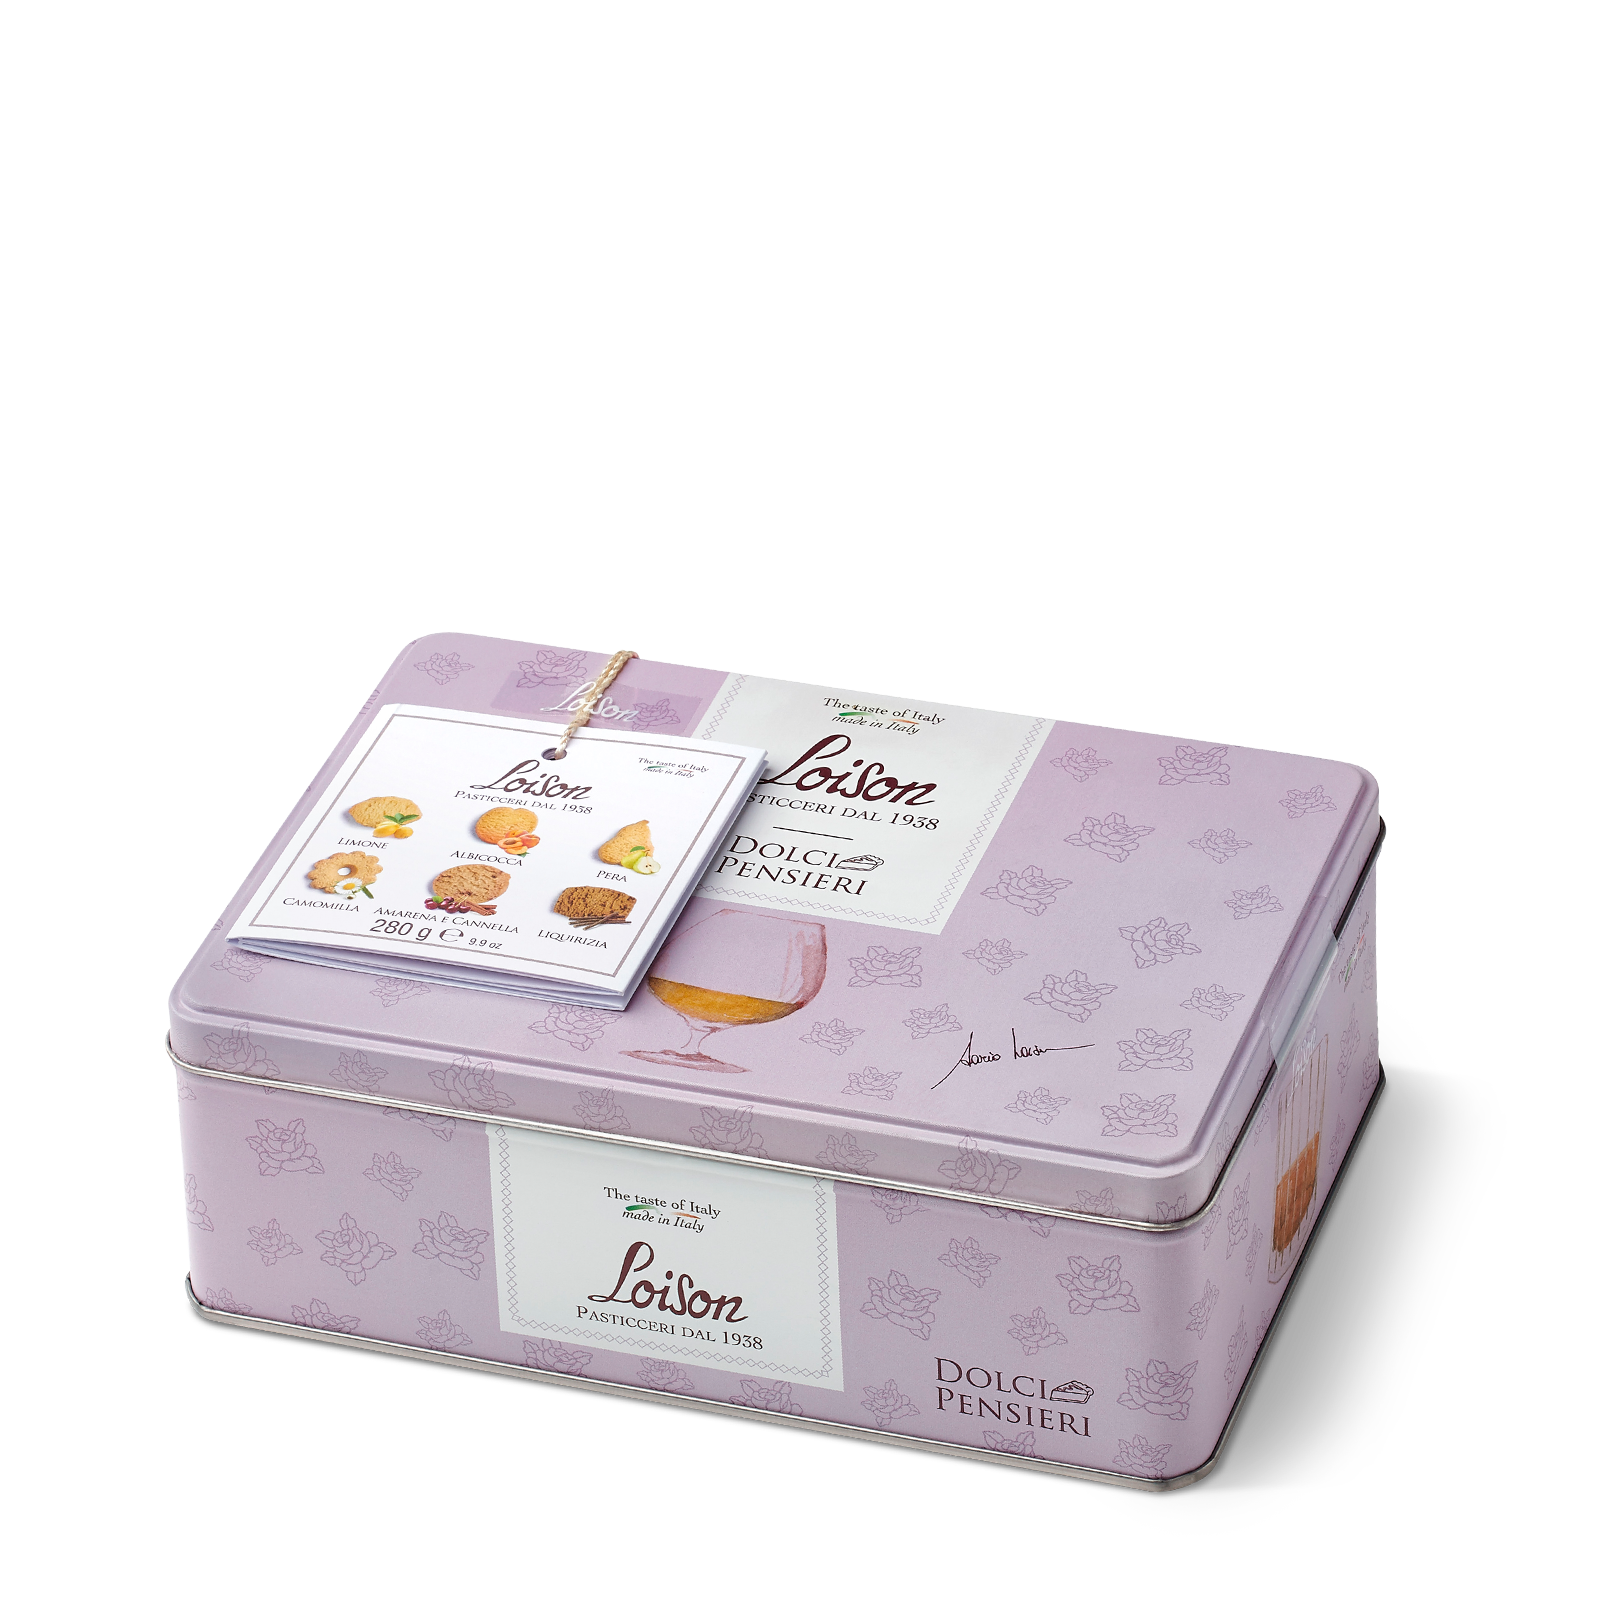 Butter Biscuits in a tin 280g - 6 flavours: fruit and meditation Loison